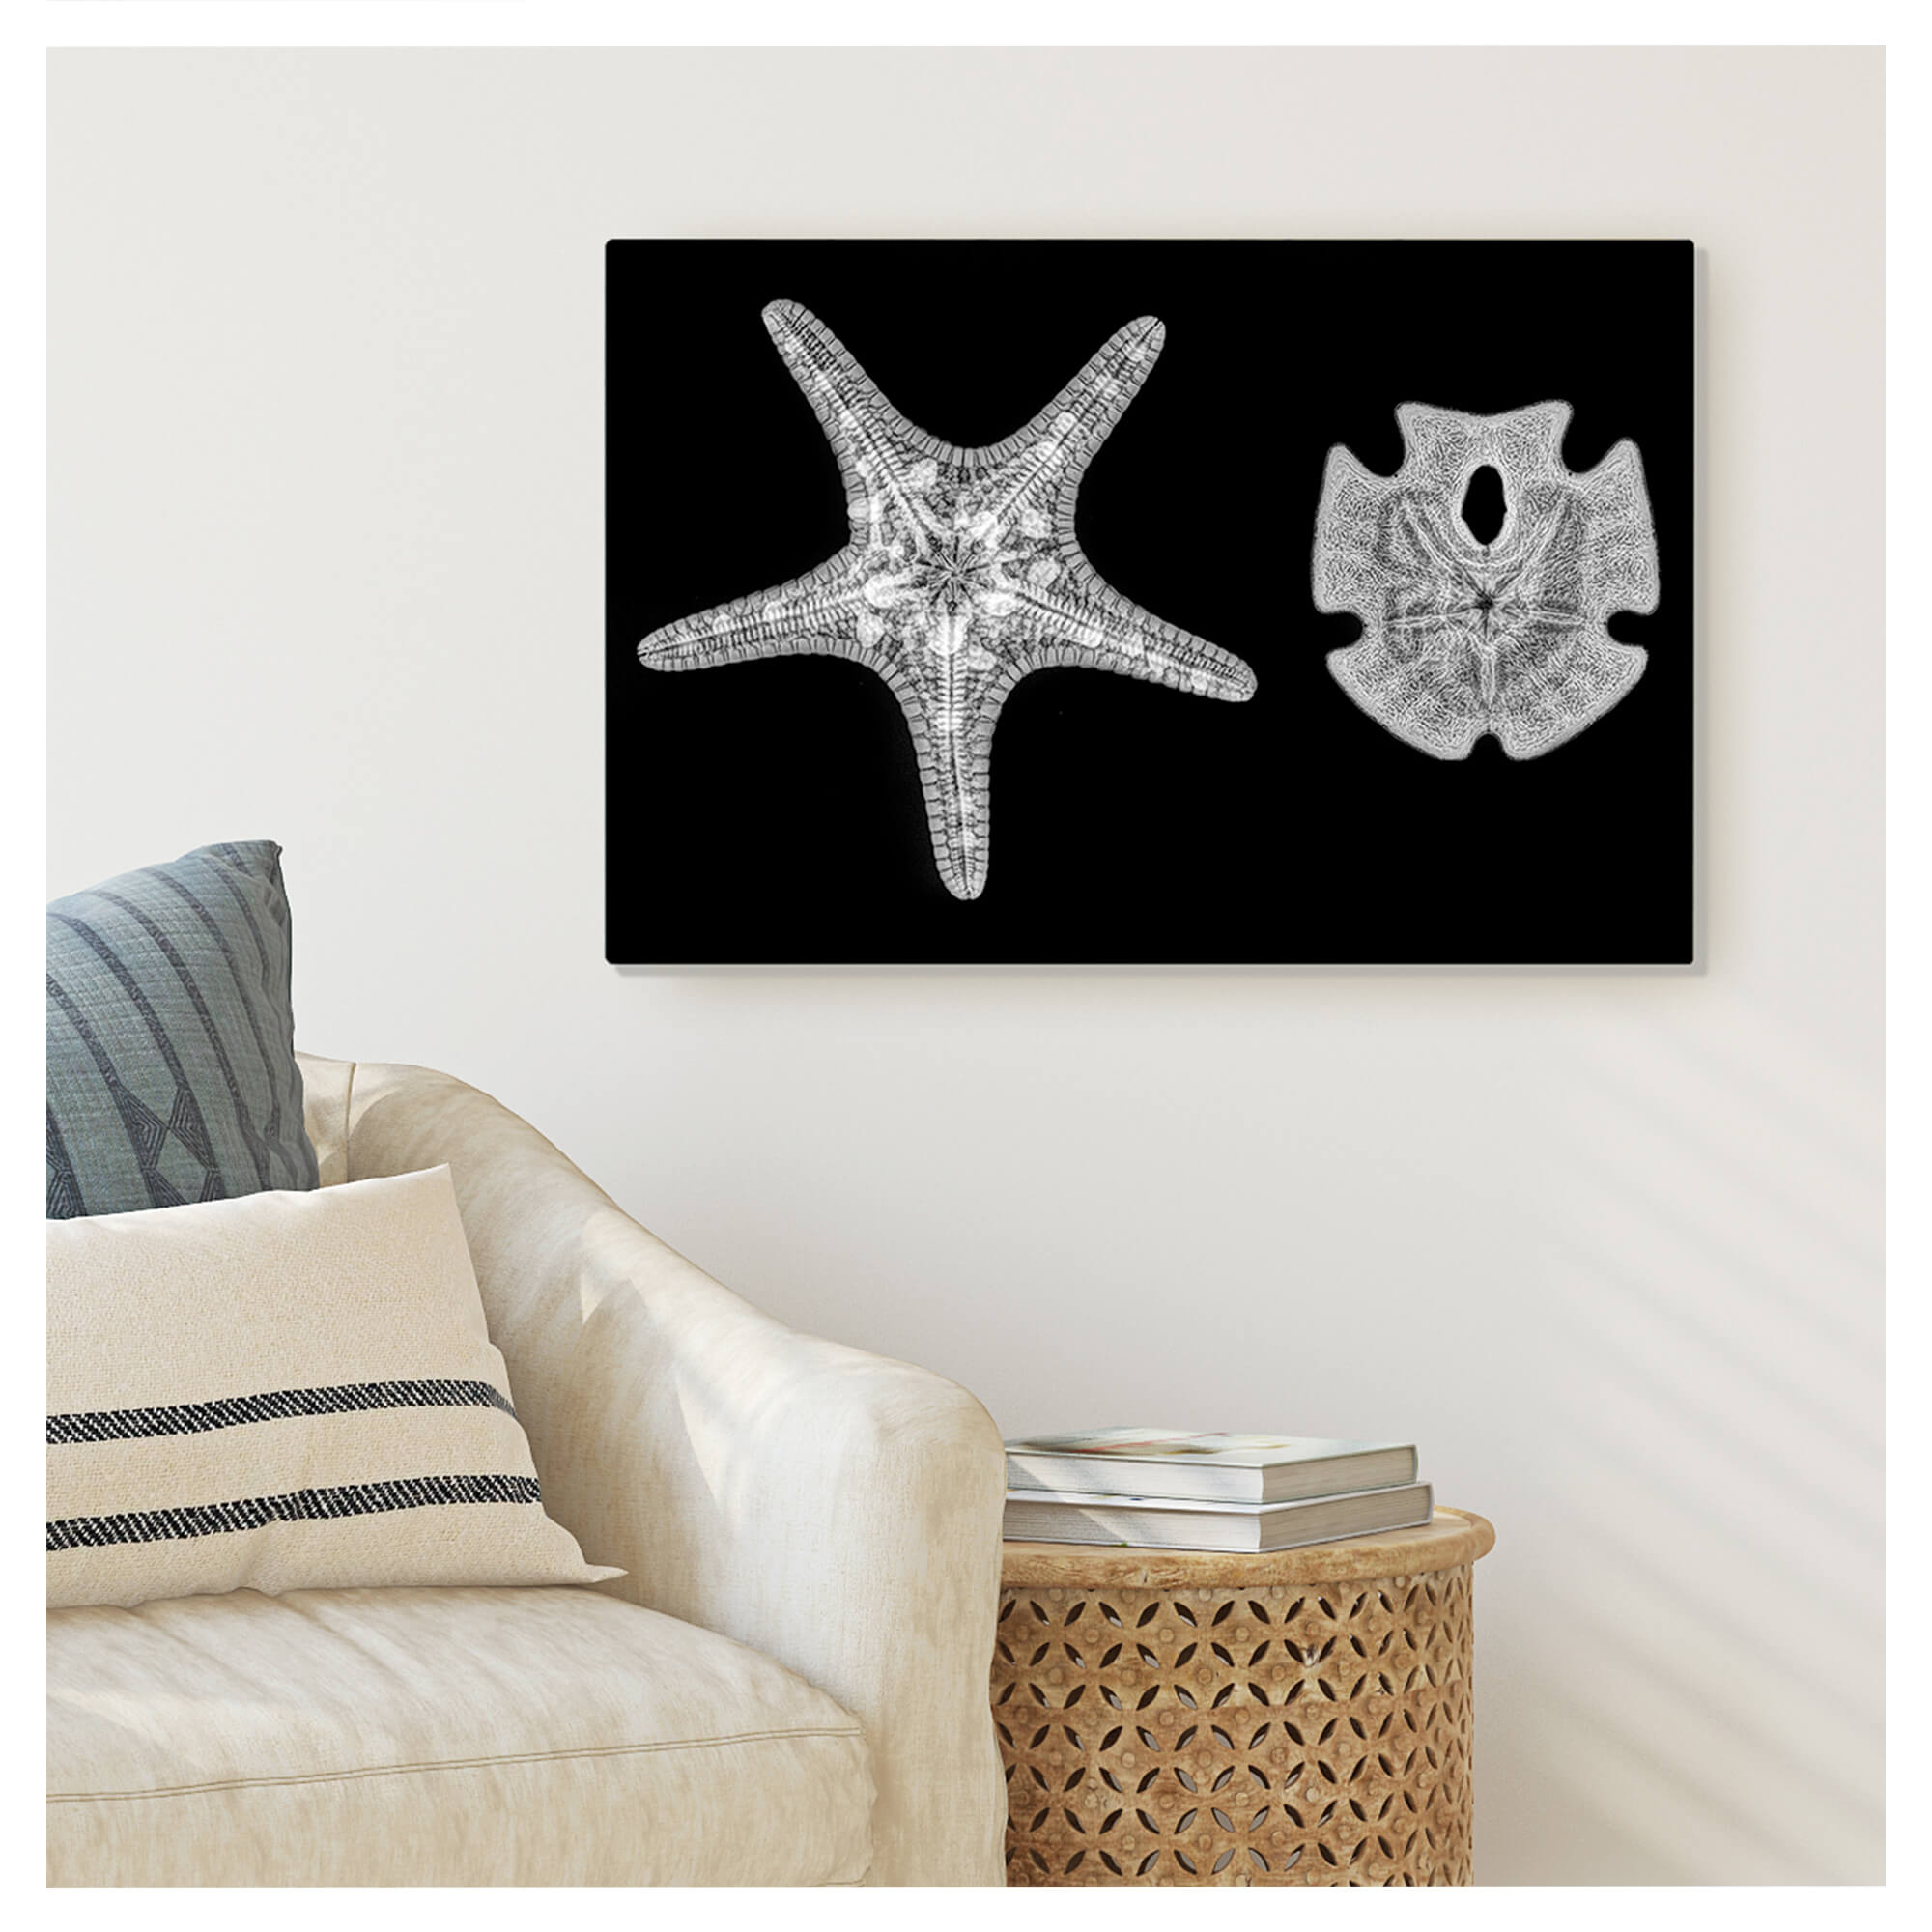 Metal print wall mockup of a starfish and a san dollar by Hawaii artist Michelle Smith